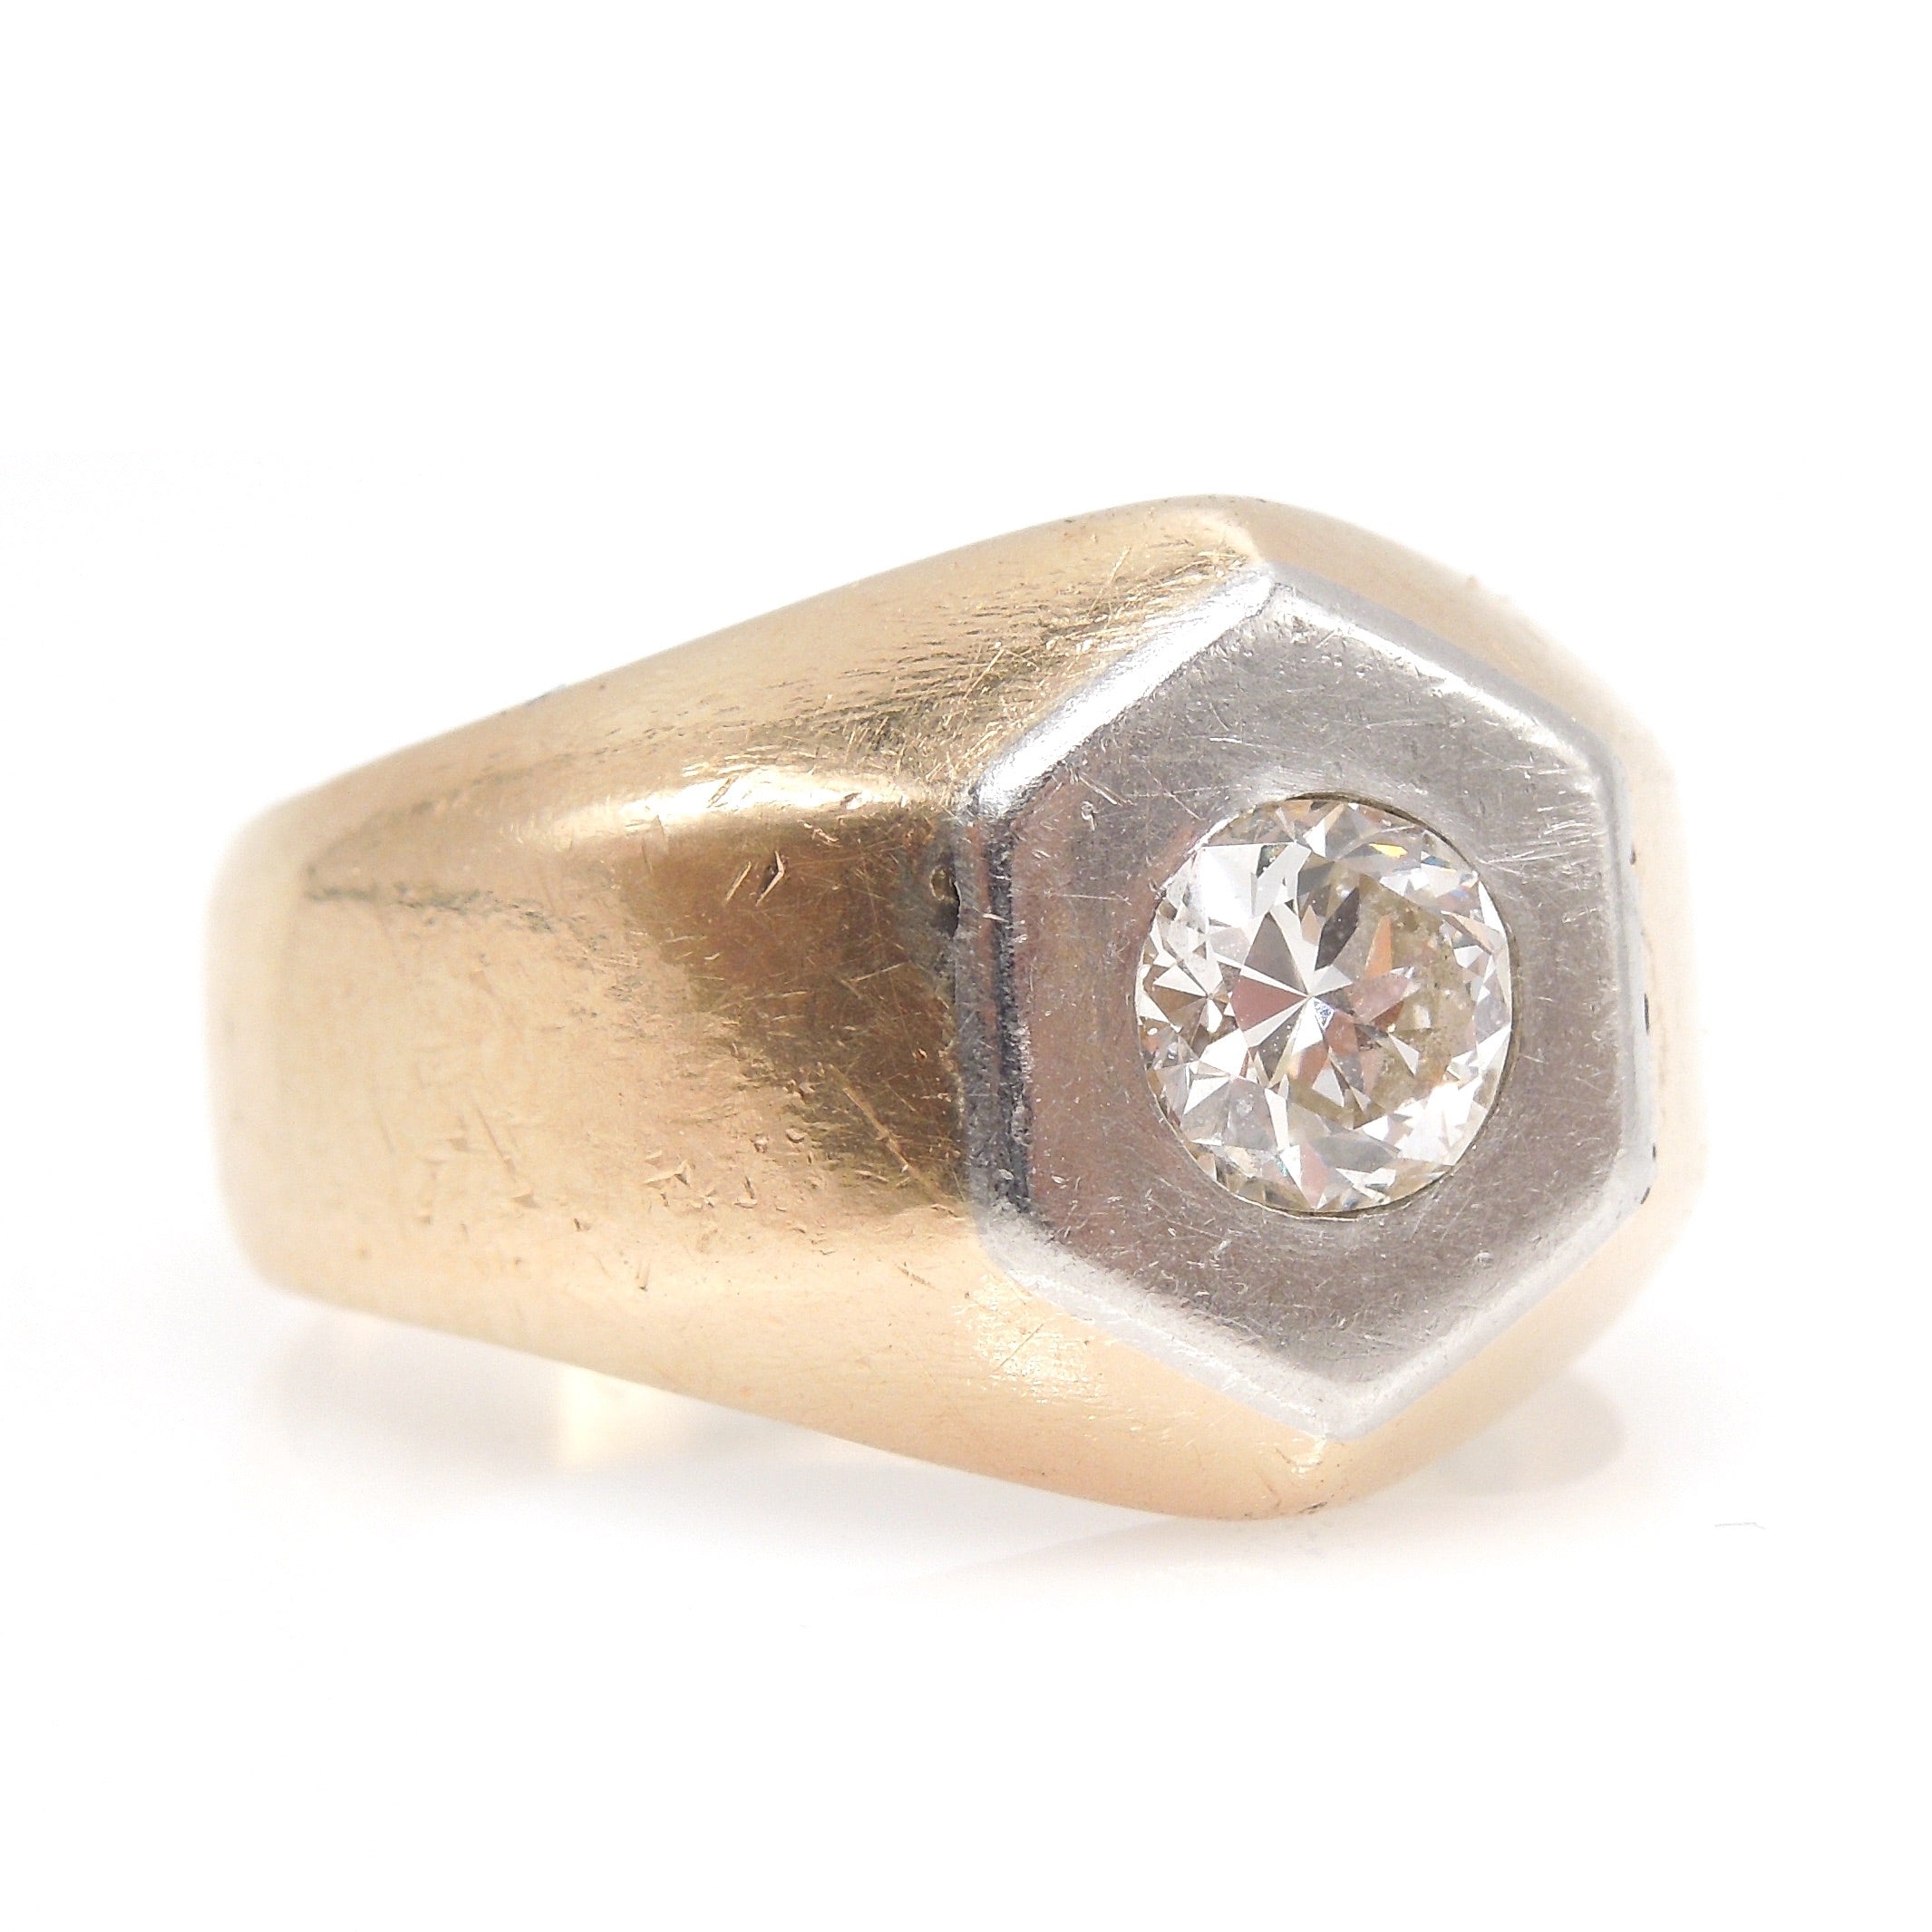 Large Bicolor Hexagonal Gents Ring in Platinum and Yellow Gold with Flush Set Half Carat Diamond